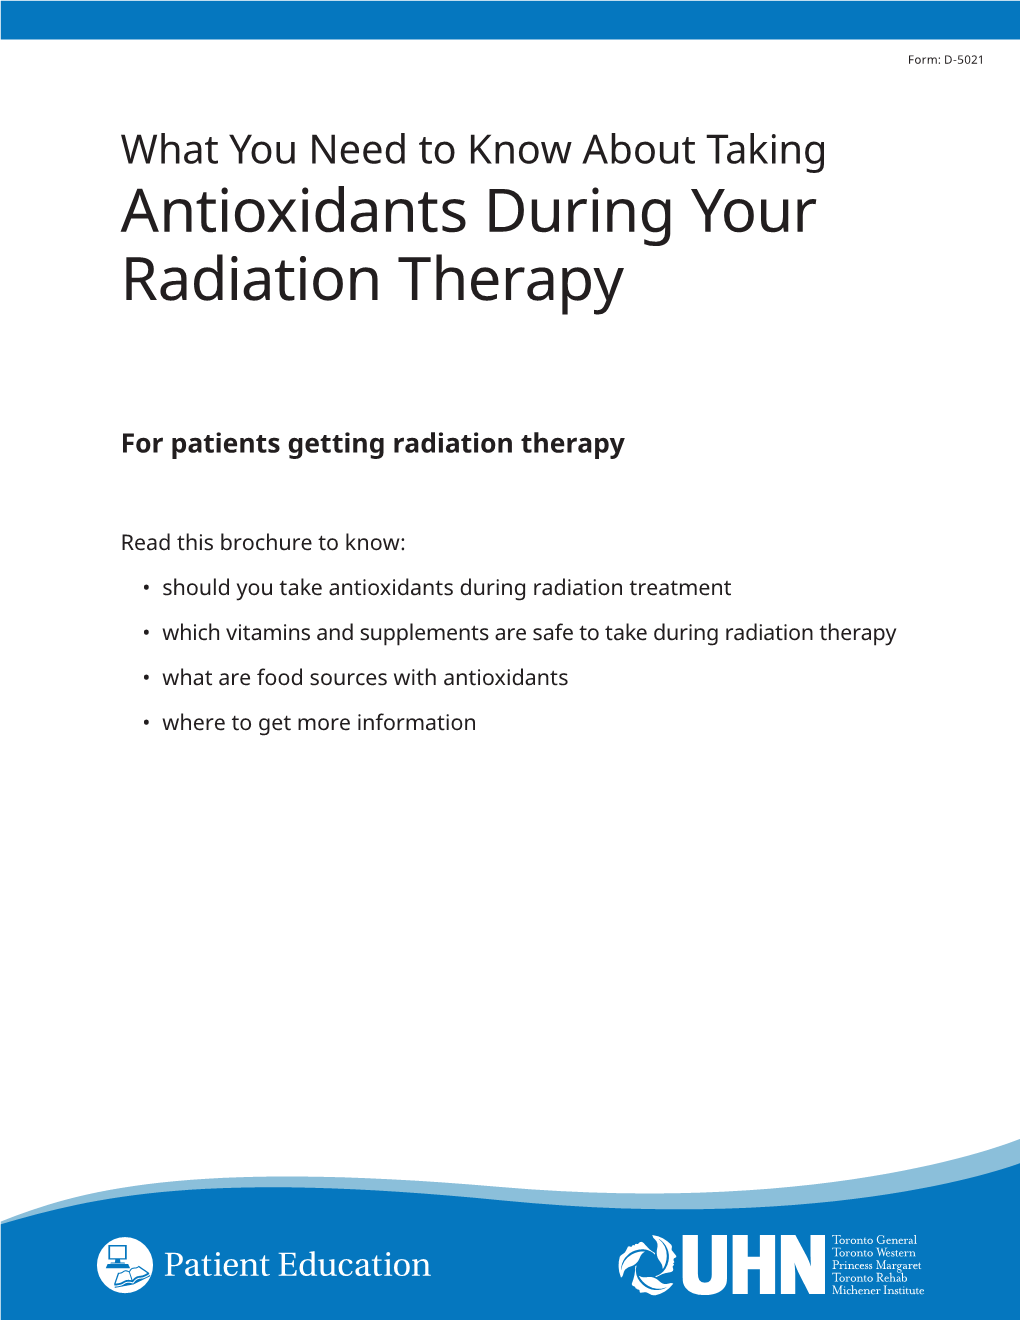 Antioxidants During Your Radiation Therapy